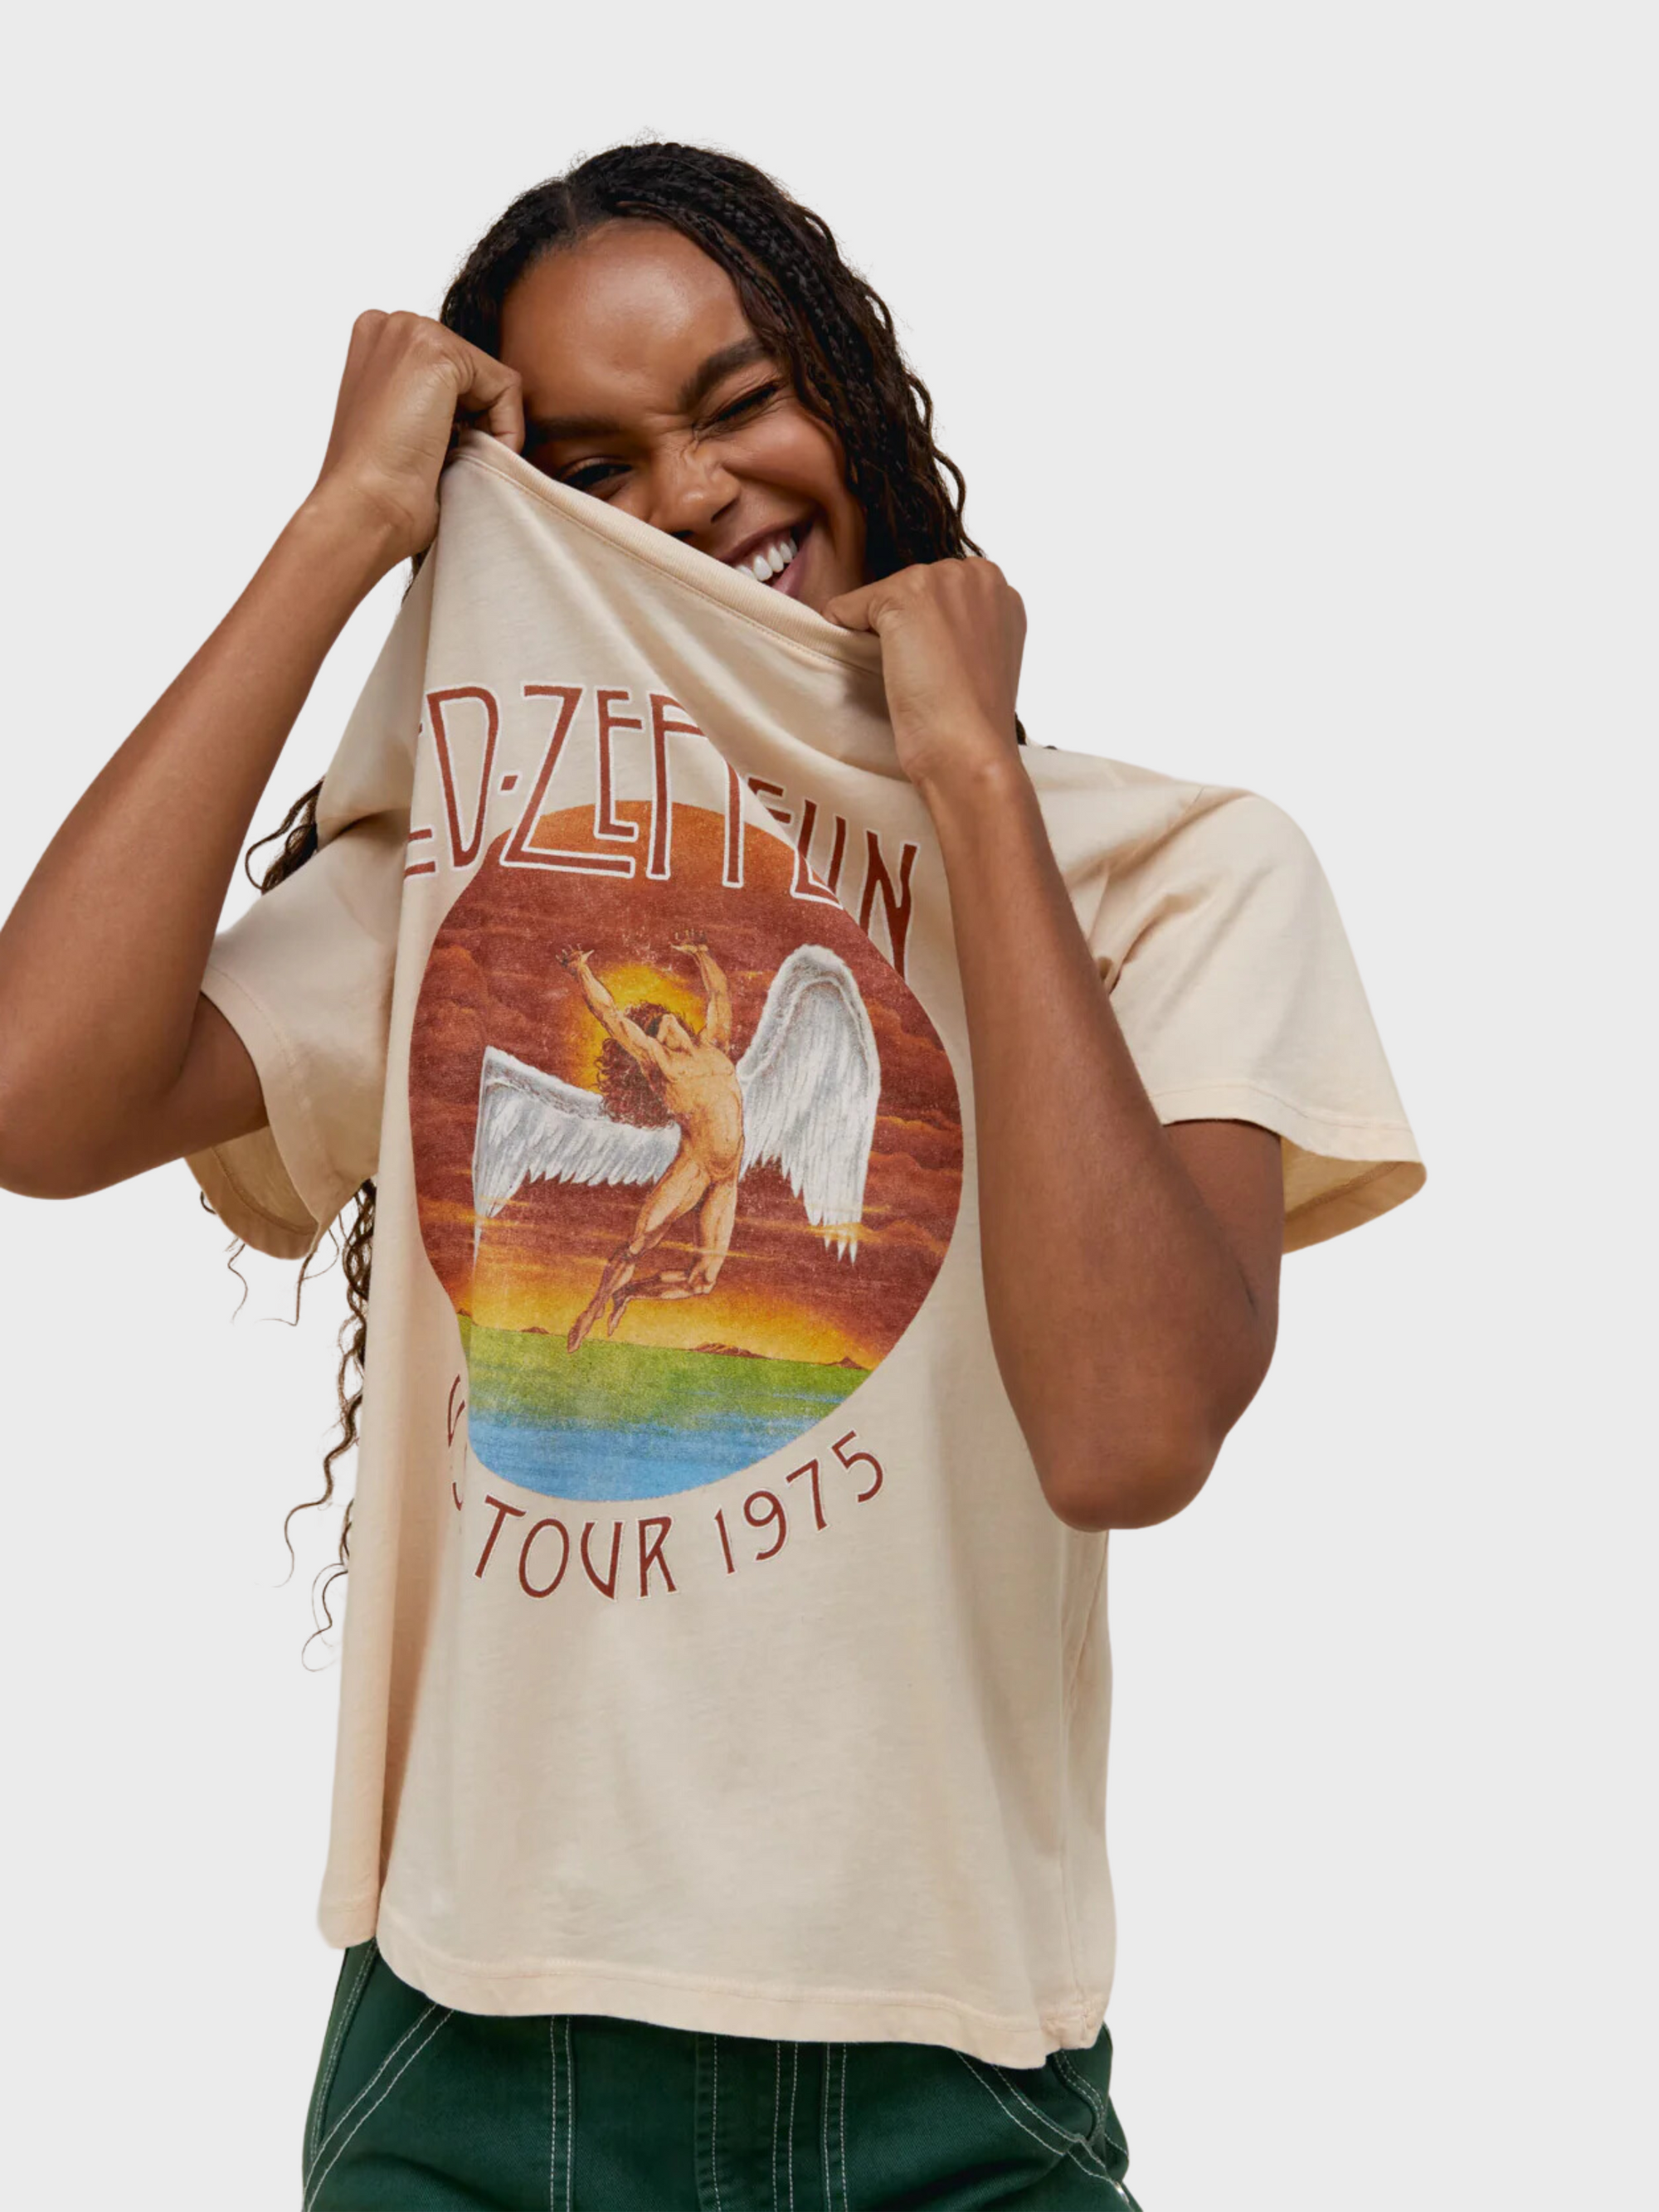 Daydreamer Led Zeppelin Tour 1975 Tee Sand-T-Shirts-West of Woodward Boutique-Vancouver-Canada